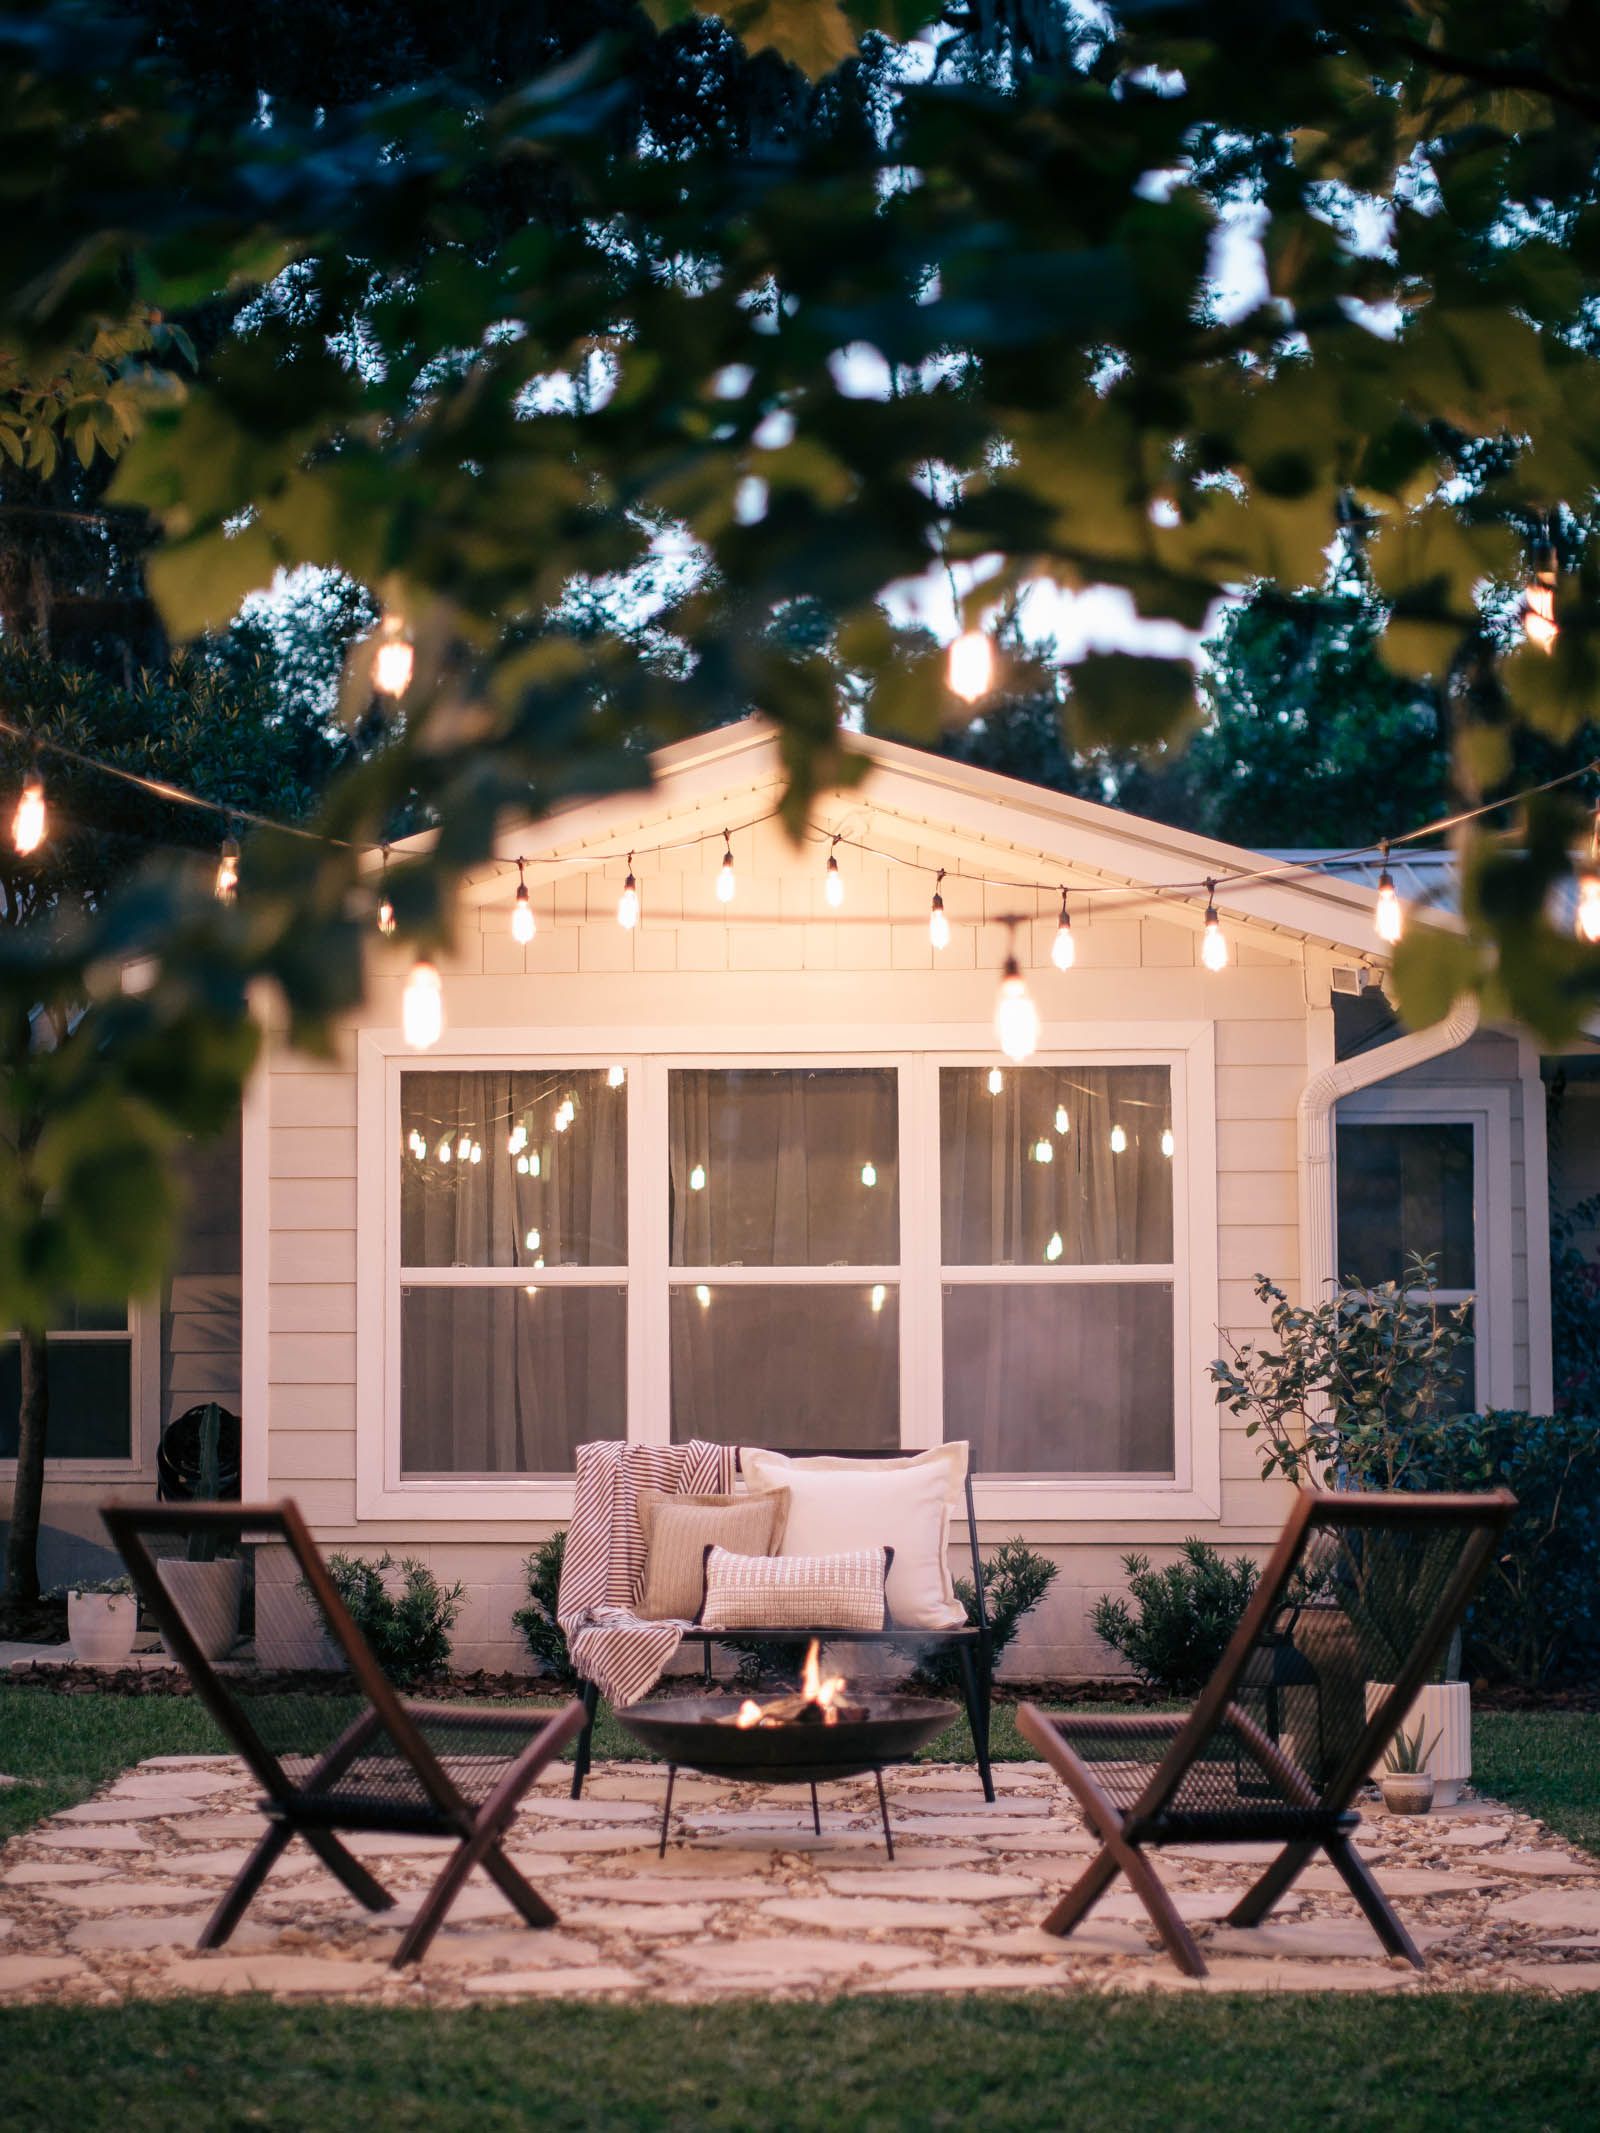 How to Maximize your Outdoor Space from Day to Night